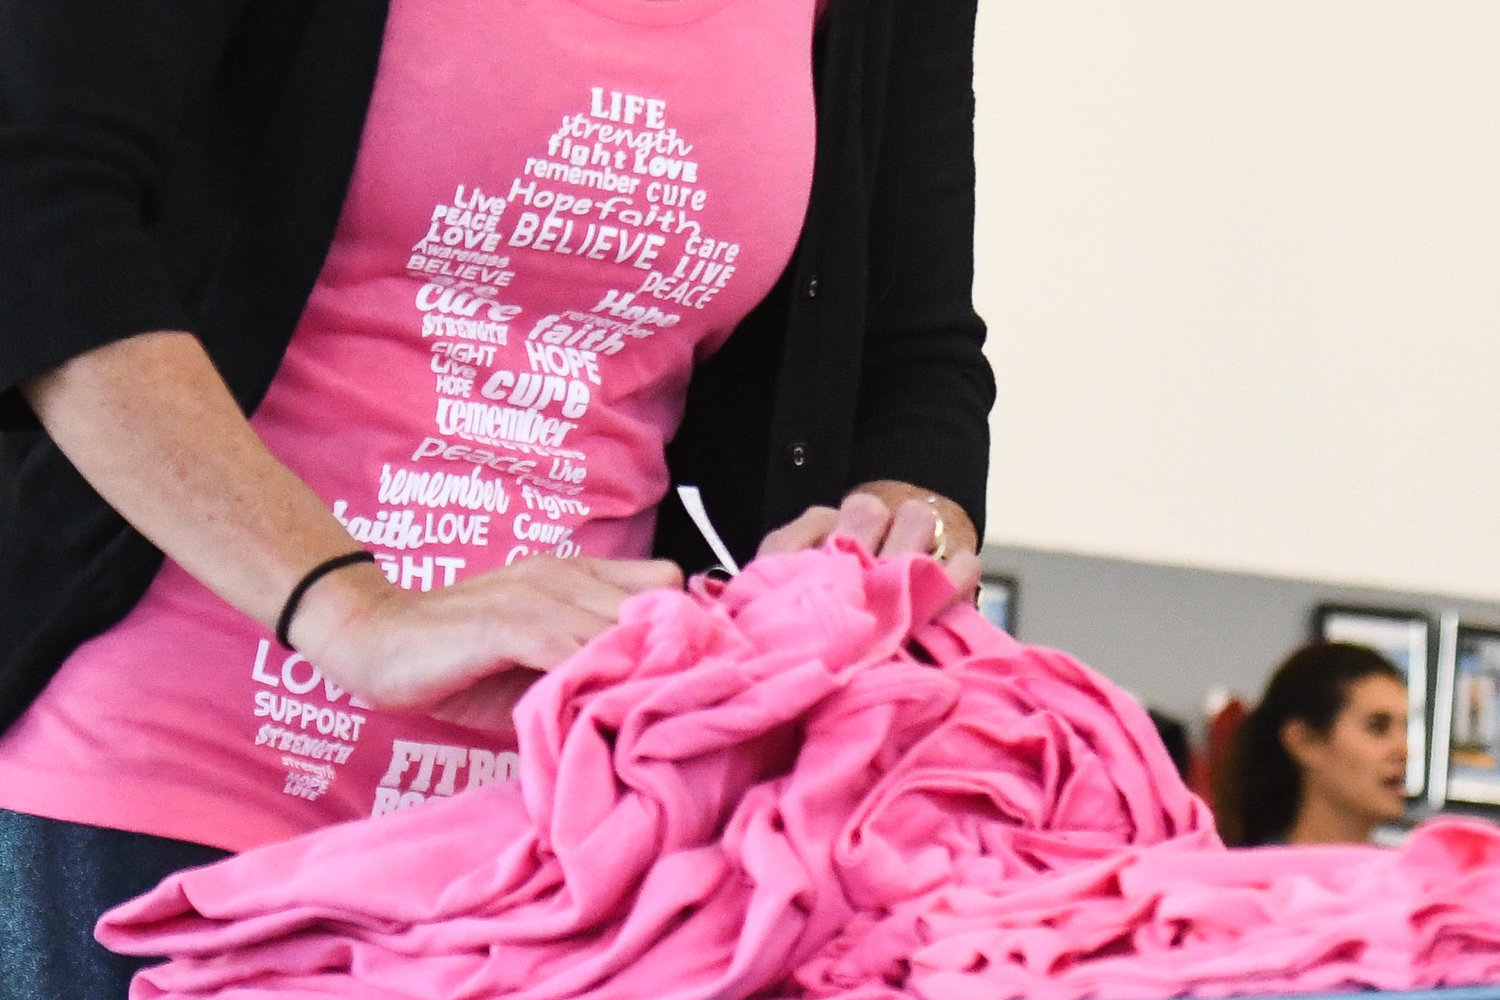 Breast cancer awareness shirts are being sold at Whitesboro Fit Body Boot Camp. The gym is raising money for breast cancer with the hopes of raising $6,000 by the end of the month.